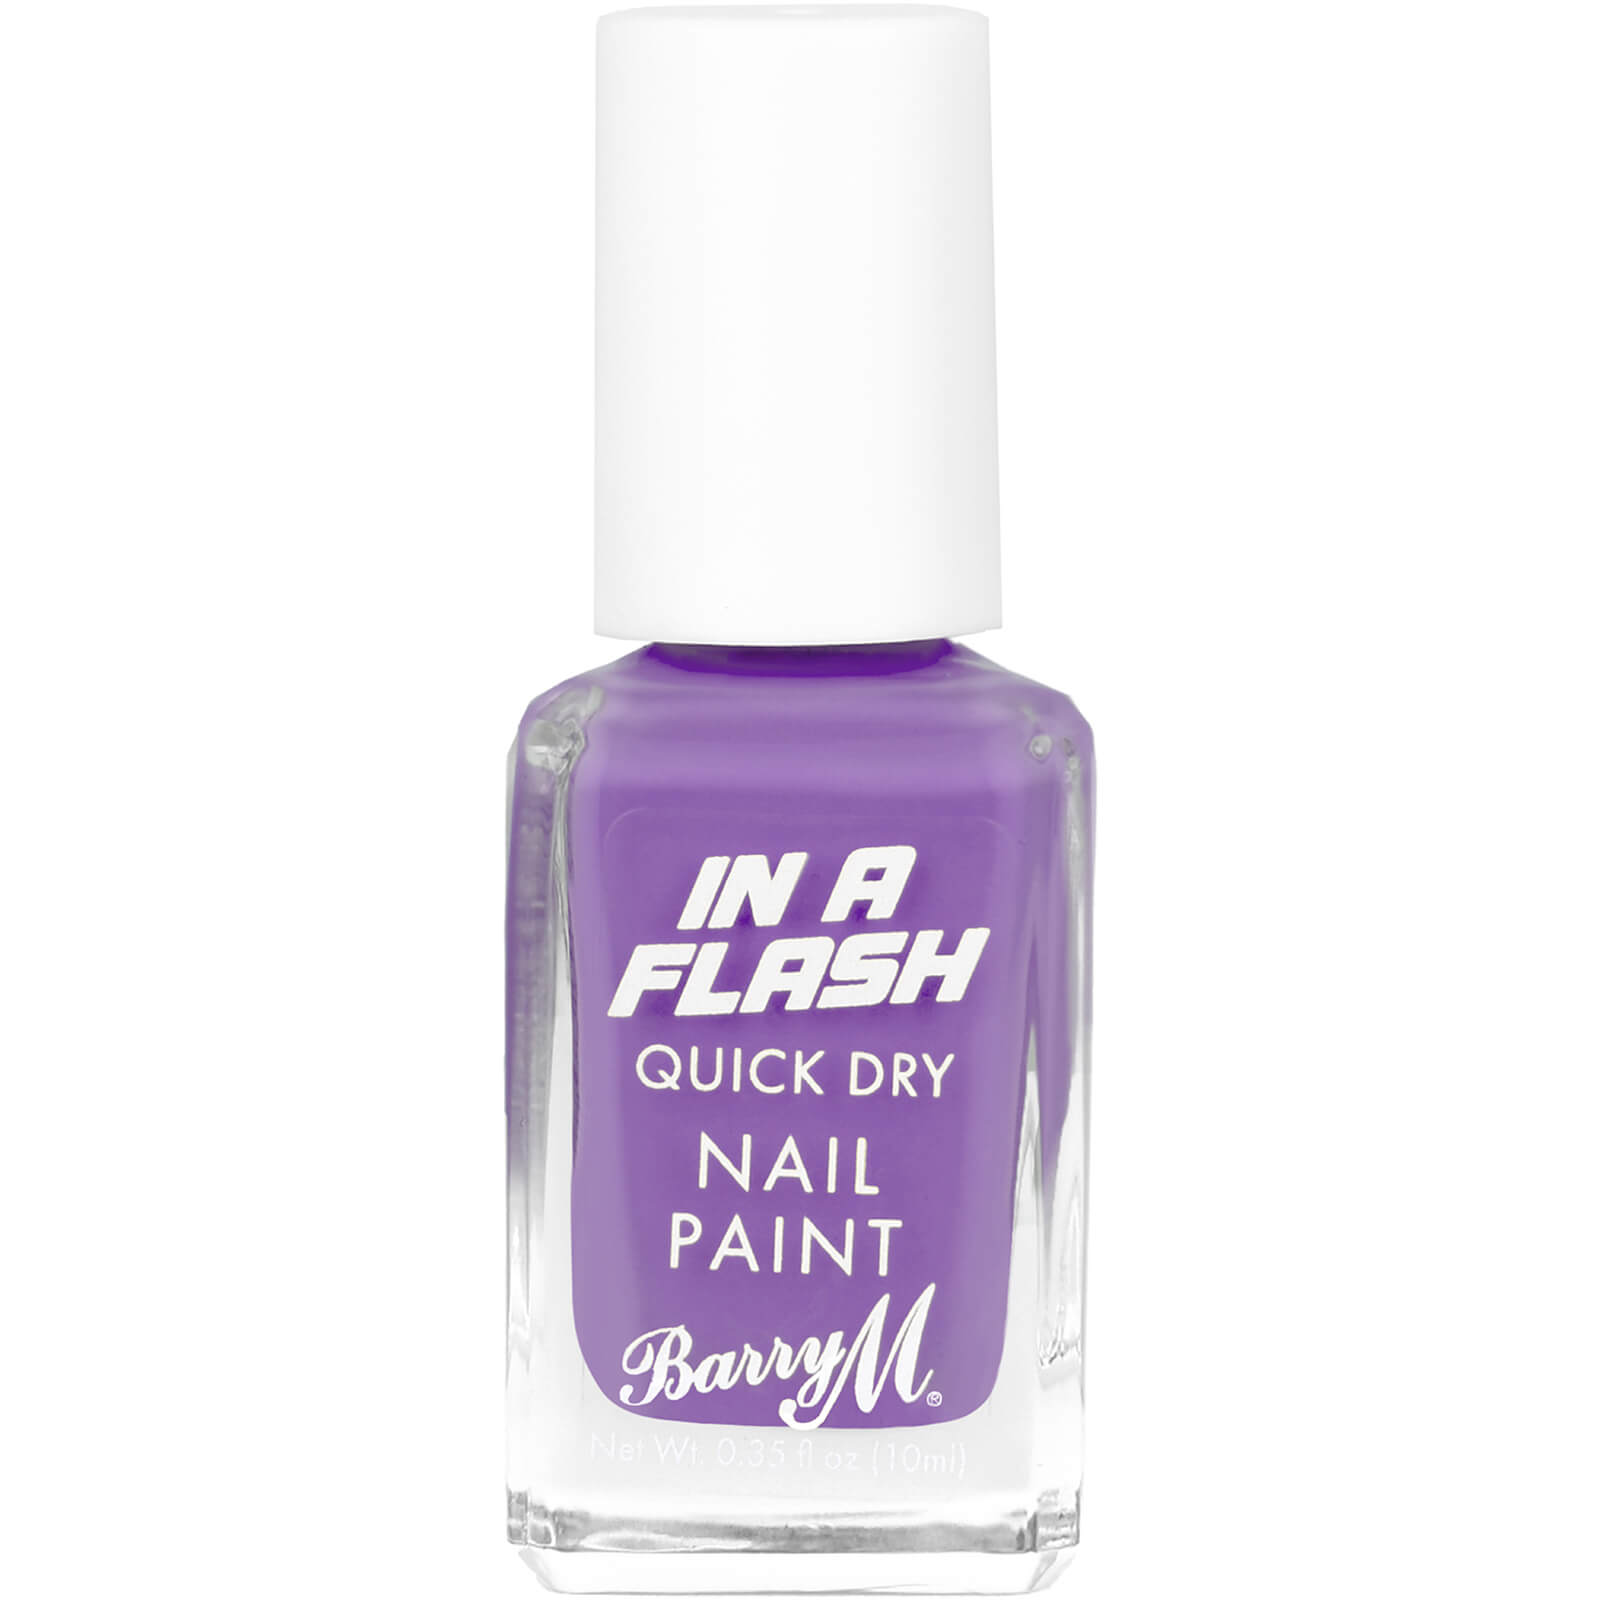 Barry M Cosmetics in a Flash Quick Dry Nail Paint 10ml (Various Shades) - Patient Purple